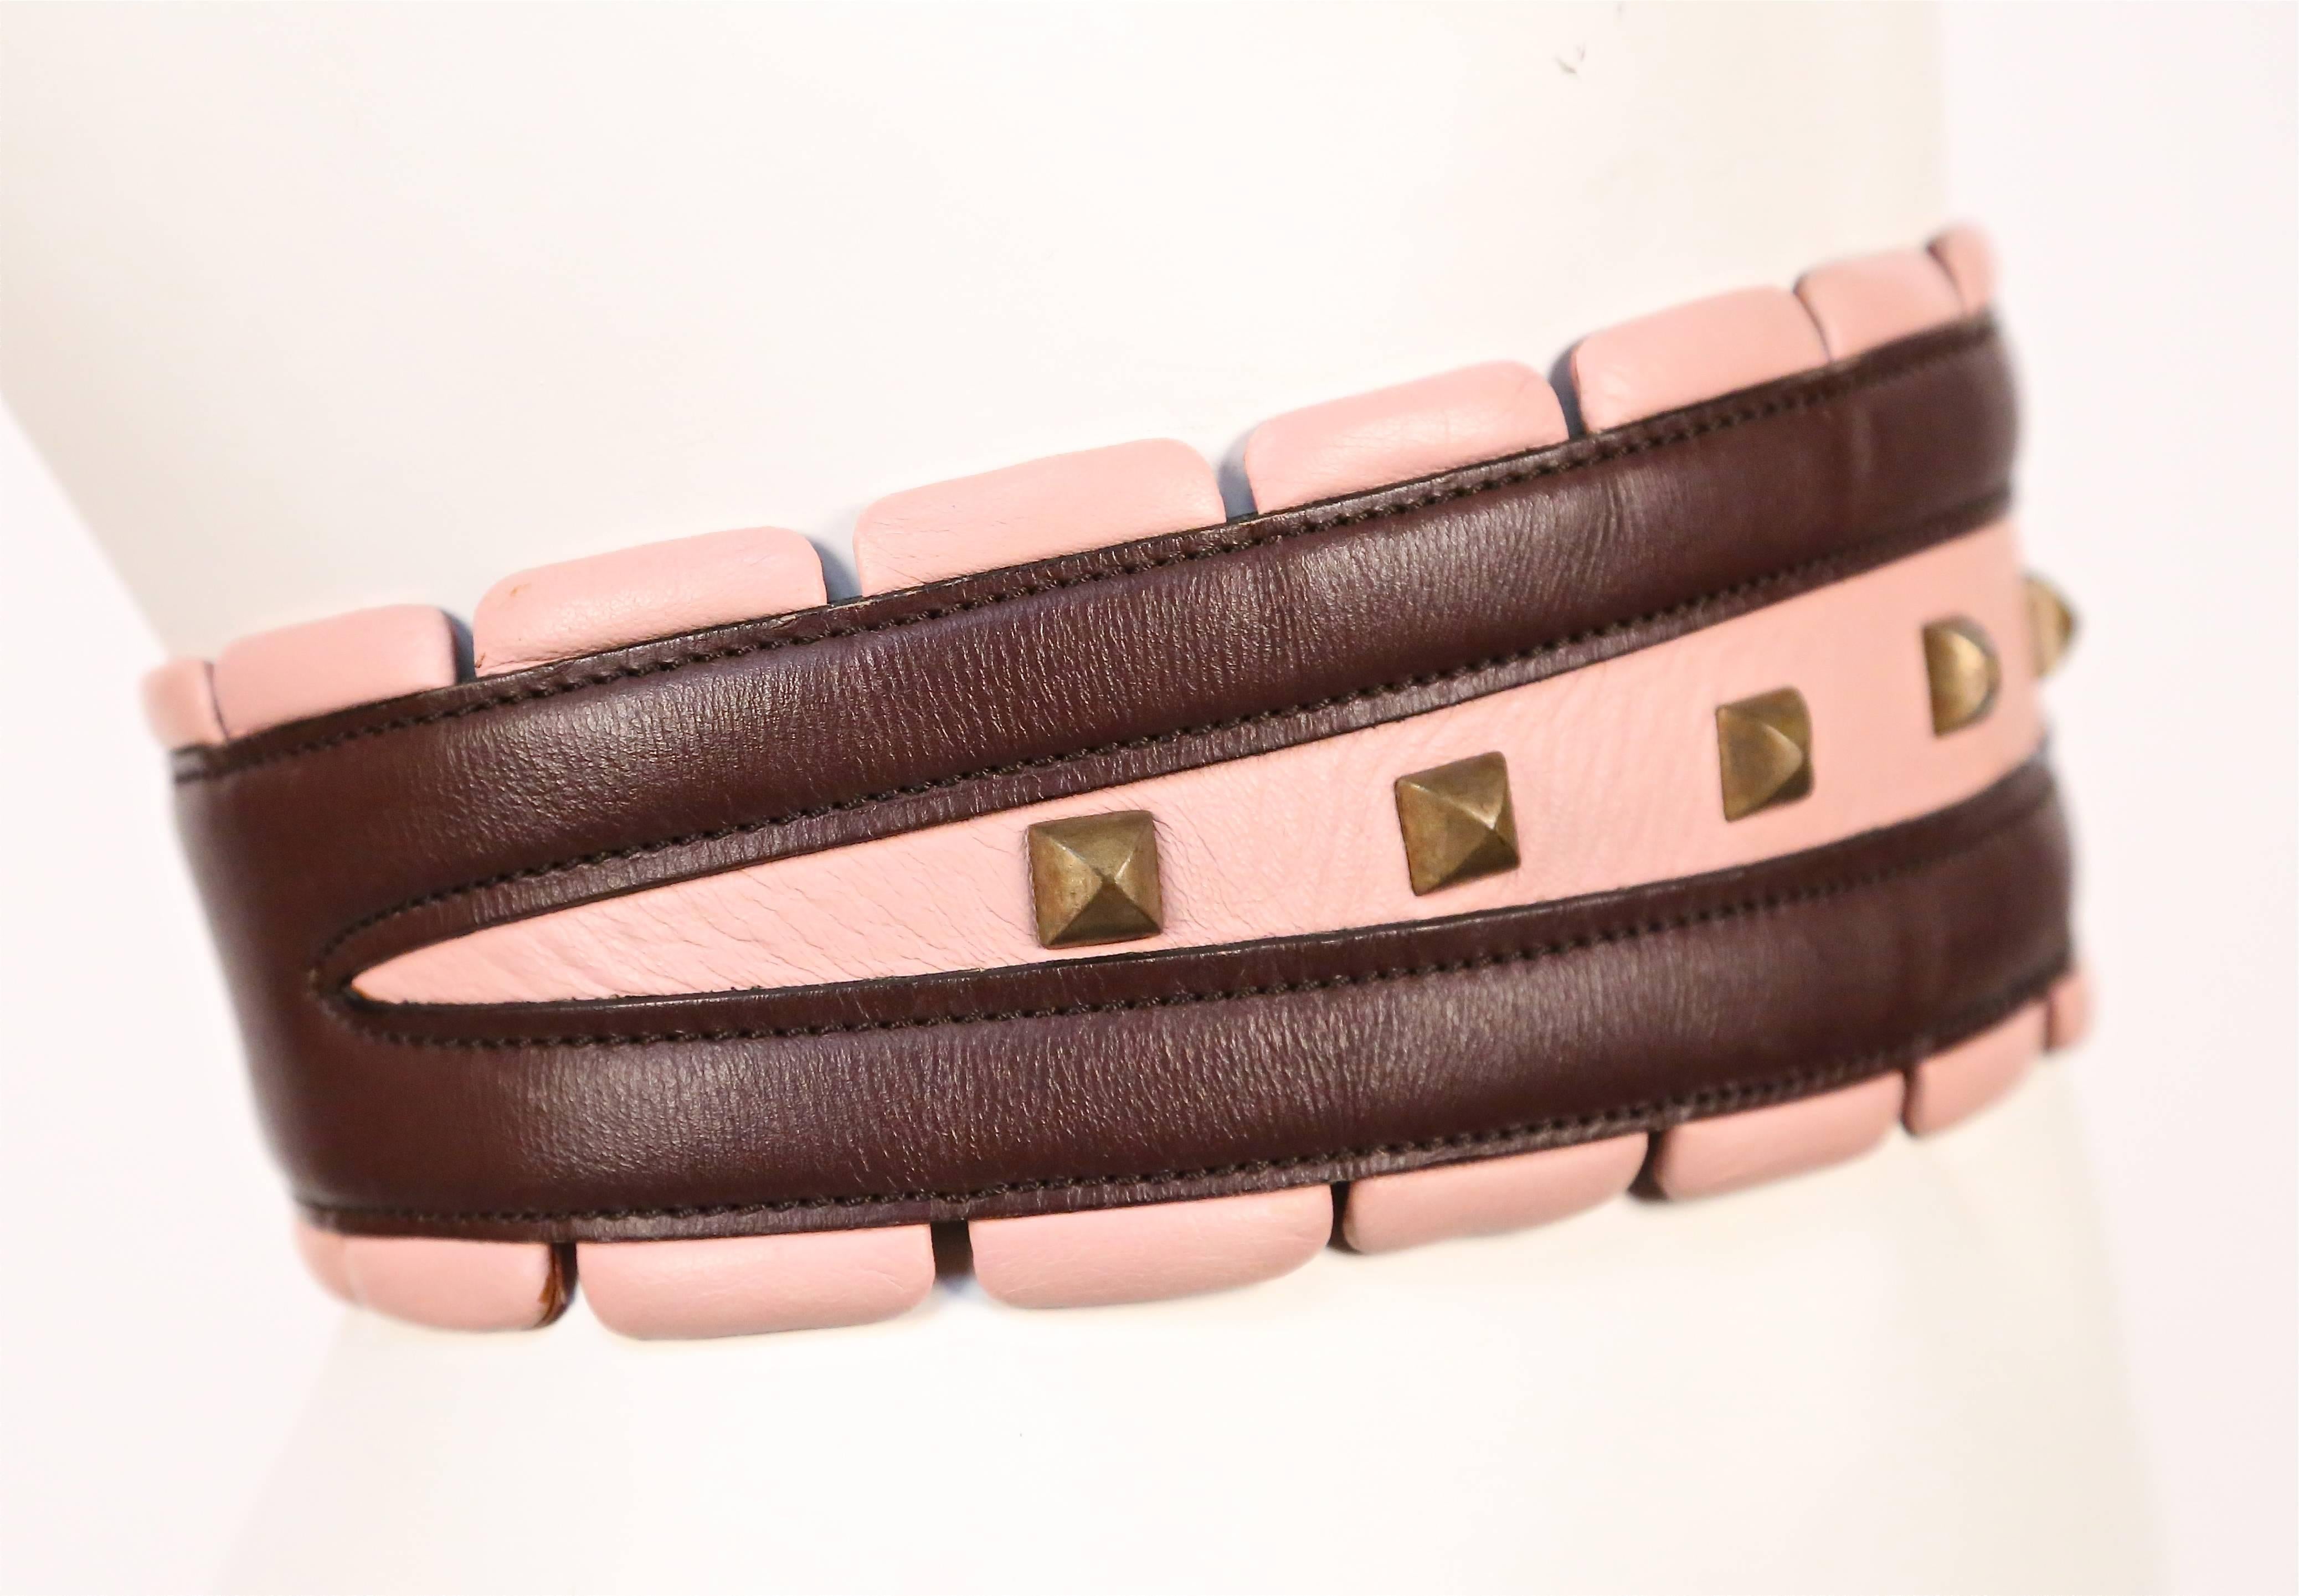 Very rare burgundy and pink leather belt with brass toned pyramid studs from Azzedine Alaia dating to the early 1990's. Belt is labeled a French 65 and ideally fits a 23-25